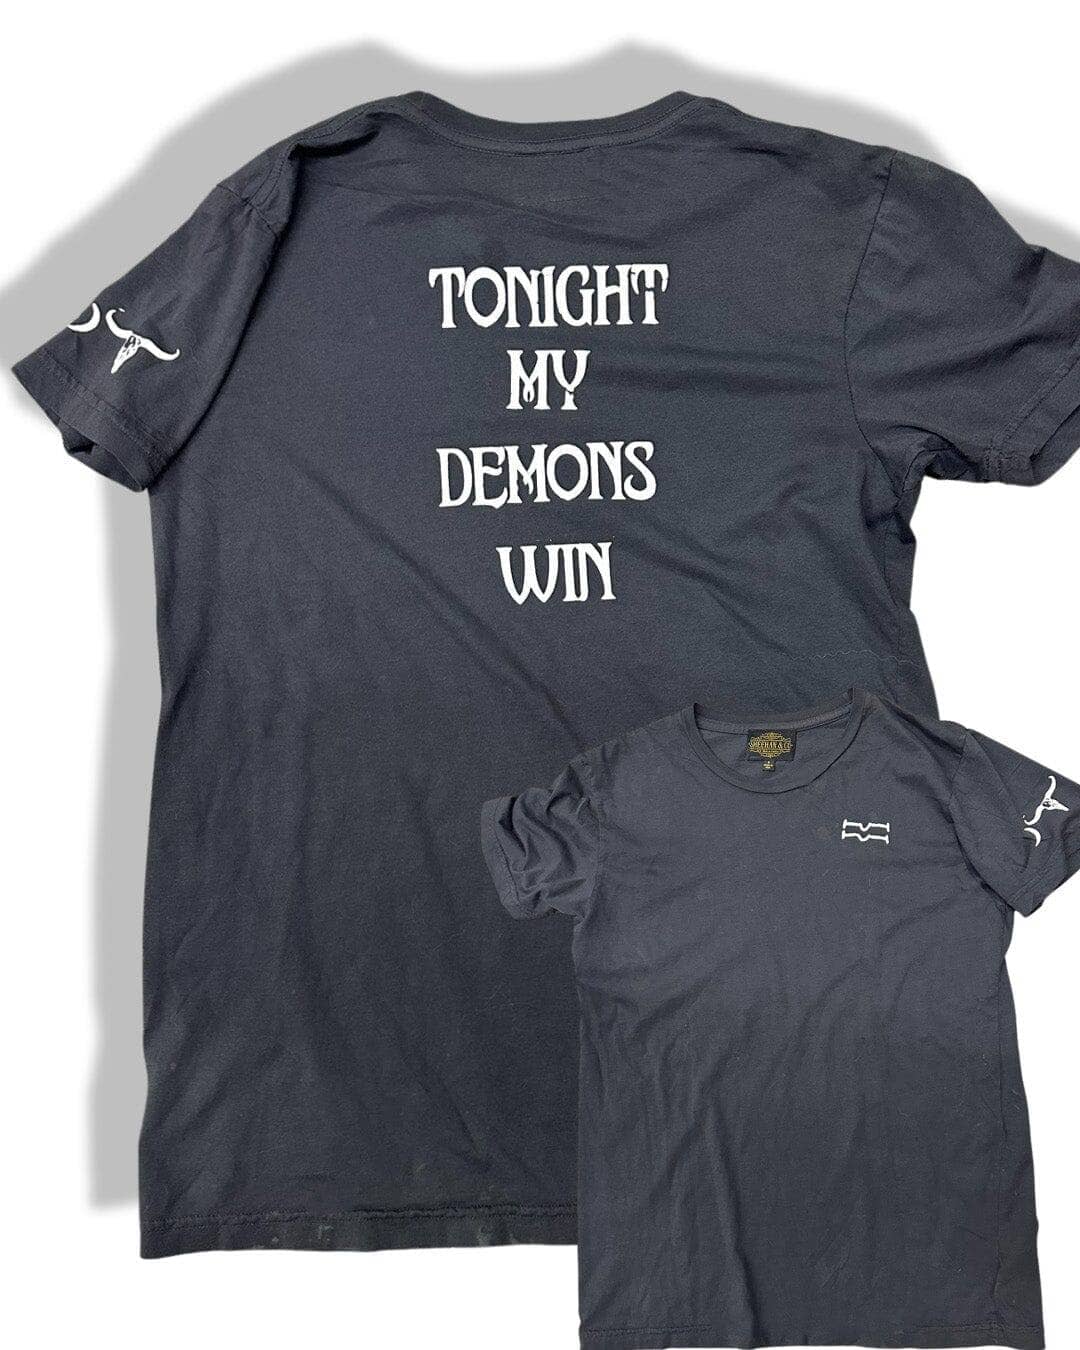 Tonight My Demons Win SS Crew Neck - Sheehan and Co.